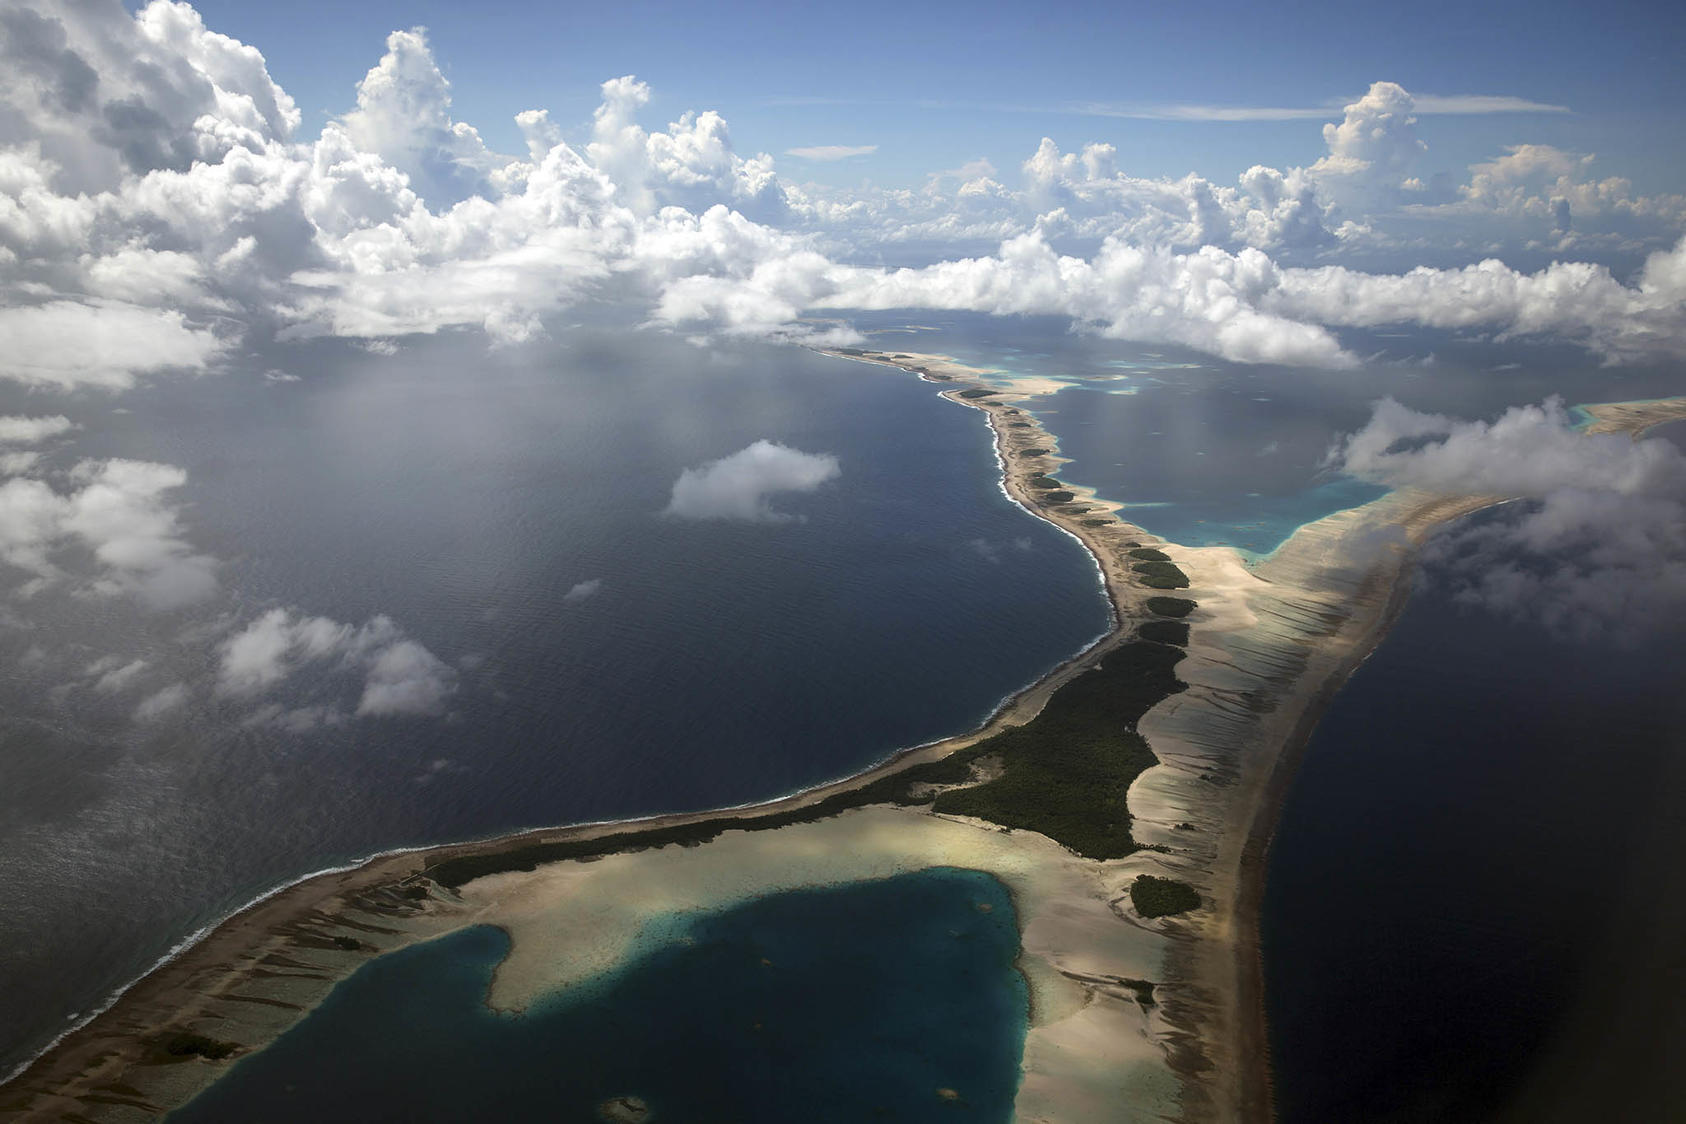 A coral atoll in the Marshall Islands. While the U.S. and Taiwan maintain strong ties with North Pacific nations, China is increasingly exerting its influence and undermining U.S. and Taiwanese interests in these countries. (Josh Haner/The New York Times)